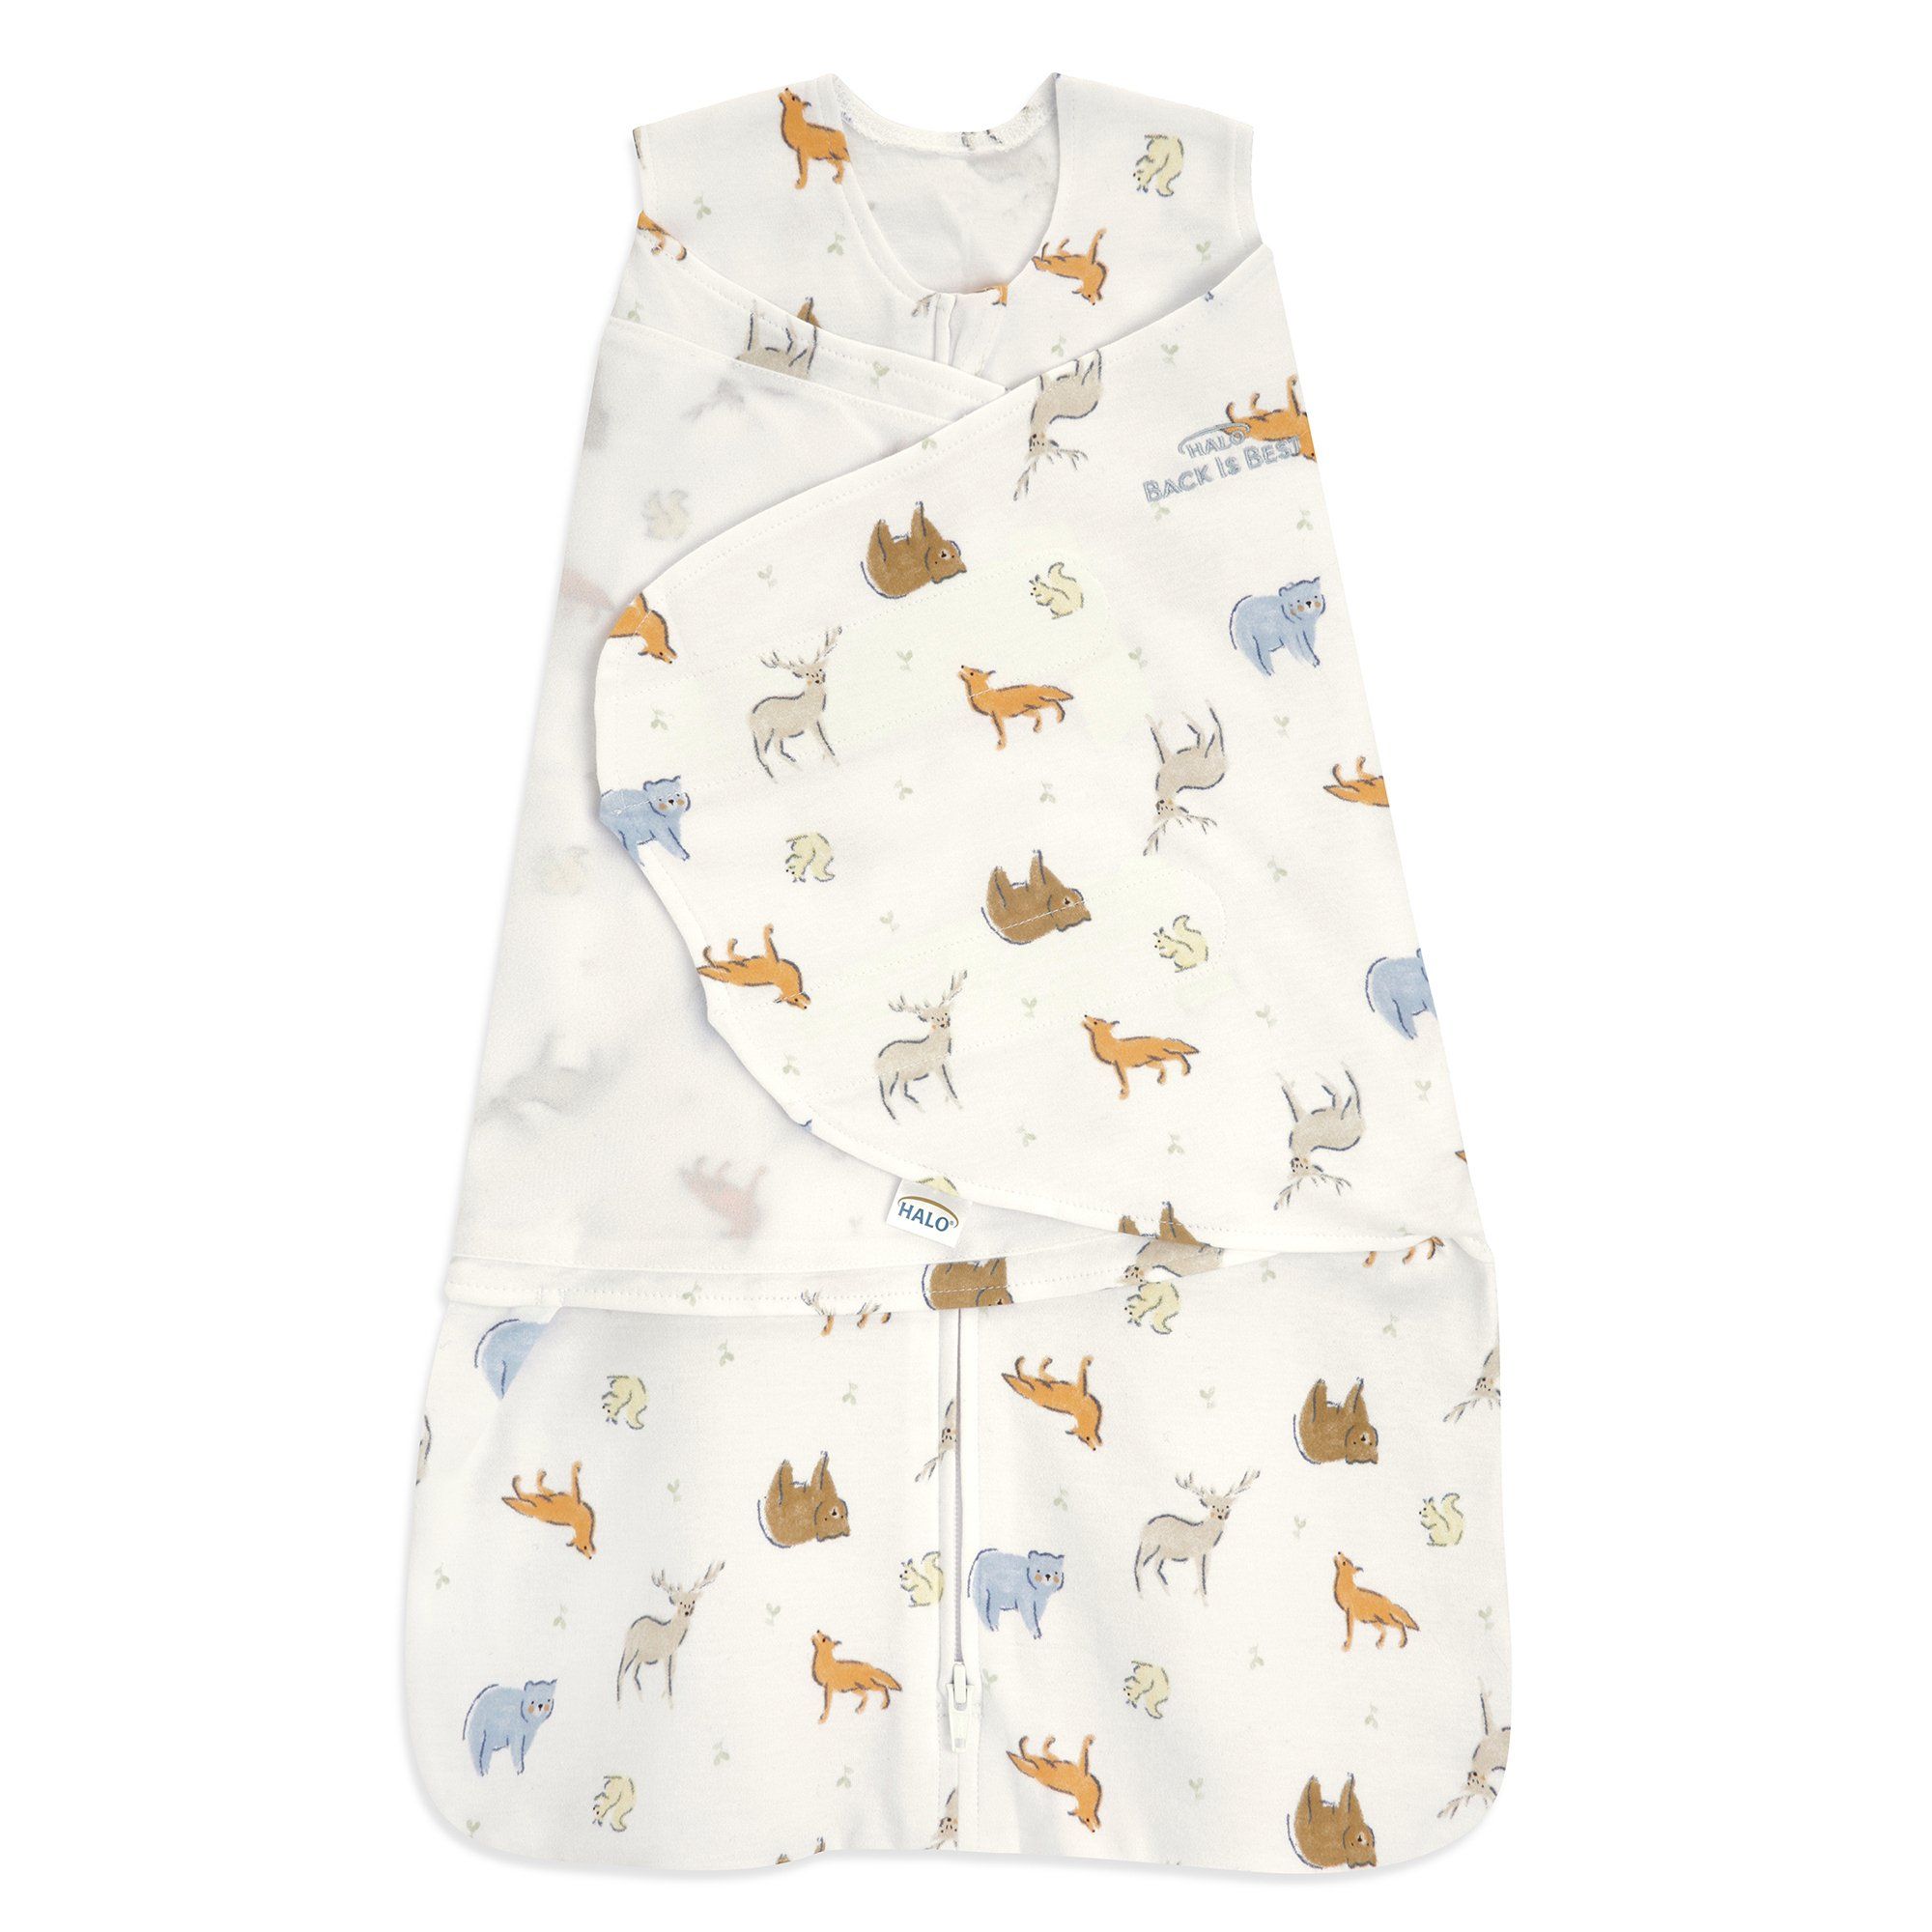 HALO SleepSack Swaddle, Forest Friends, Small (3 to 6 Months) - 1 ct